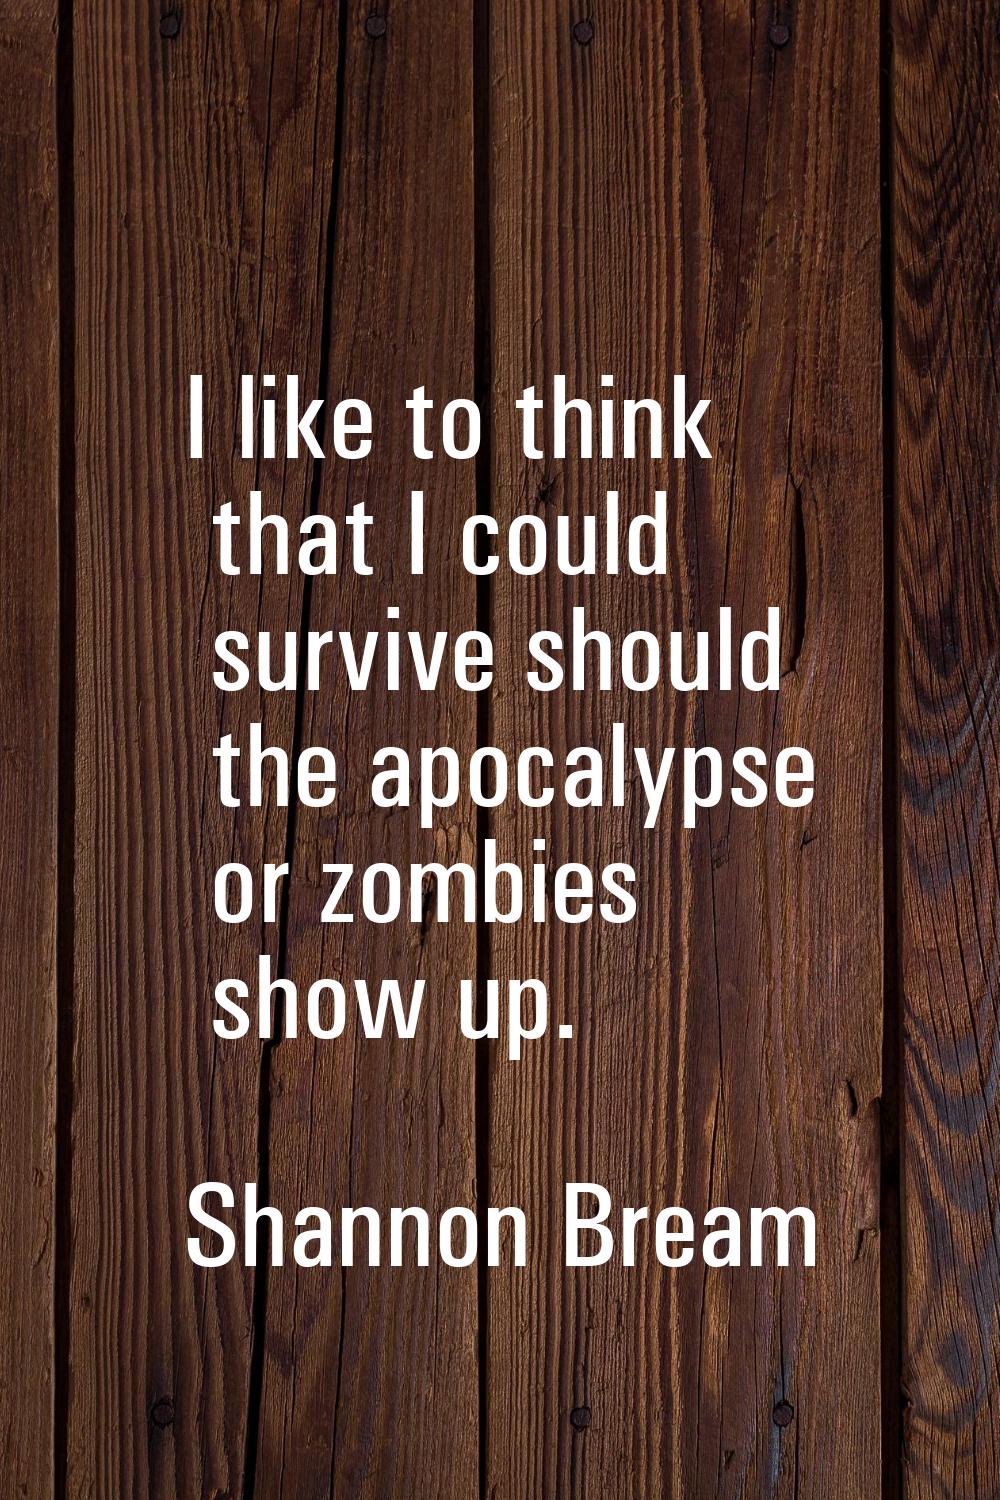 I like to think that I could survive should the apocalypse or zombies show up.